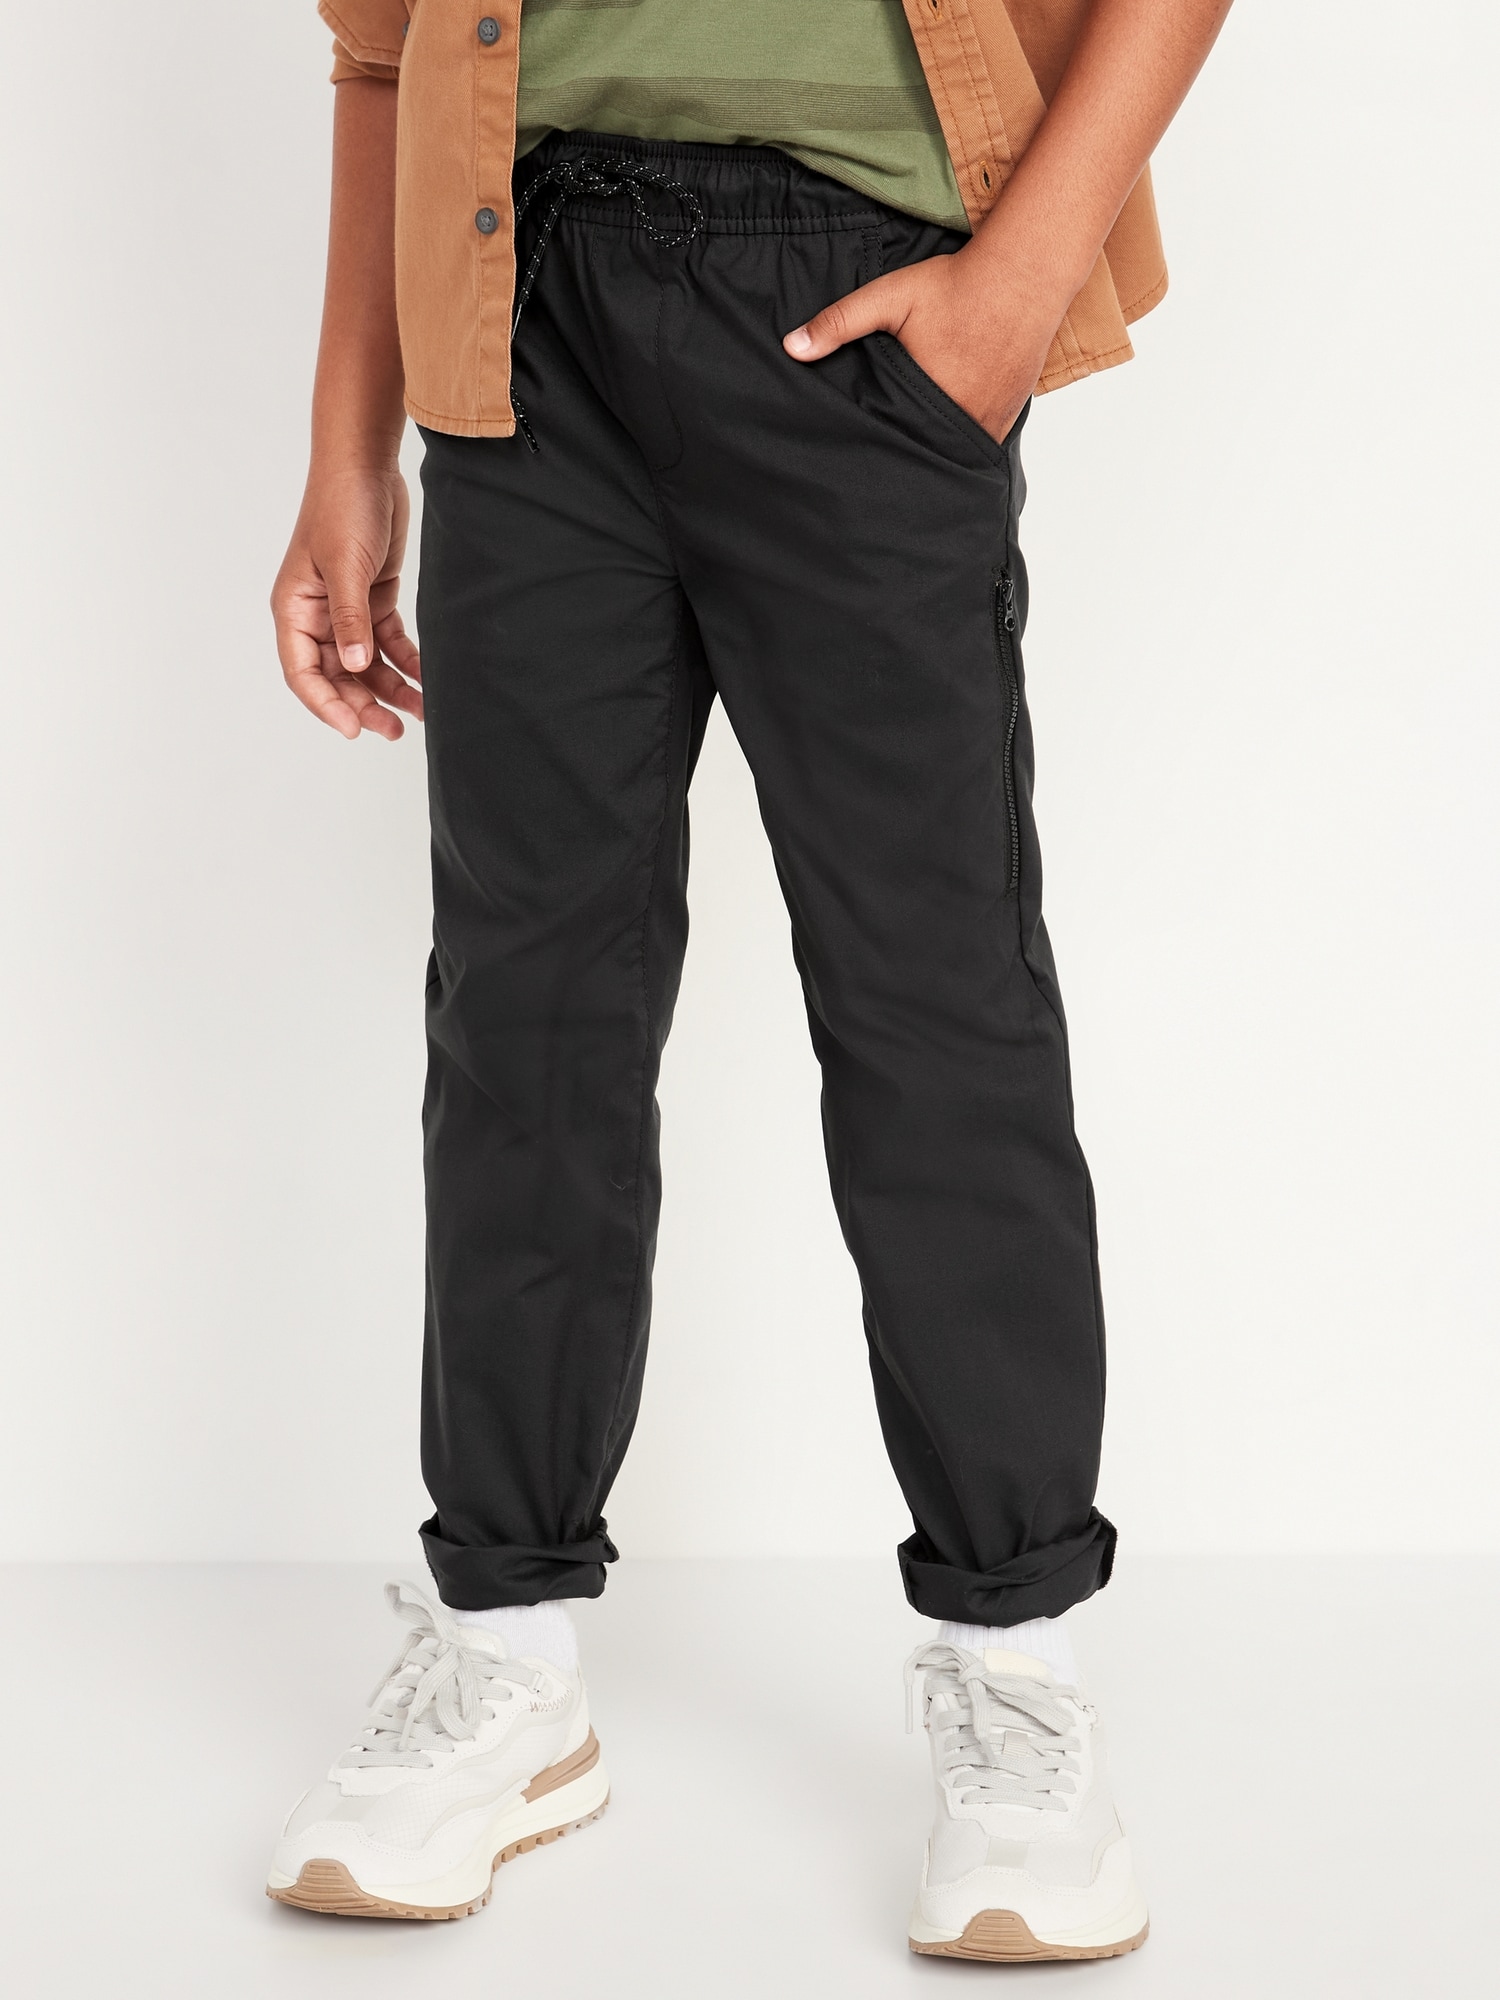 Old Navy Built-In Flex Tapered Tech Pants for Boys black. 1